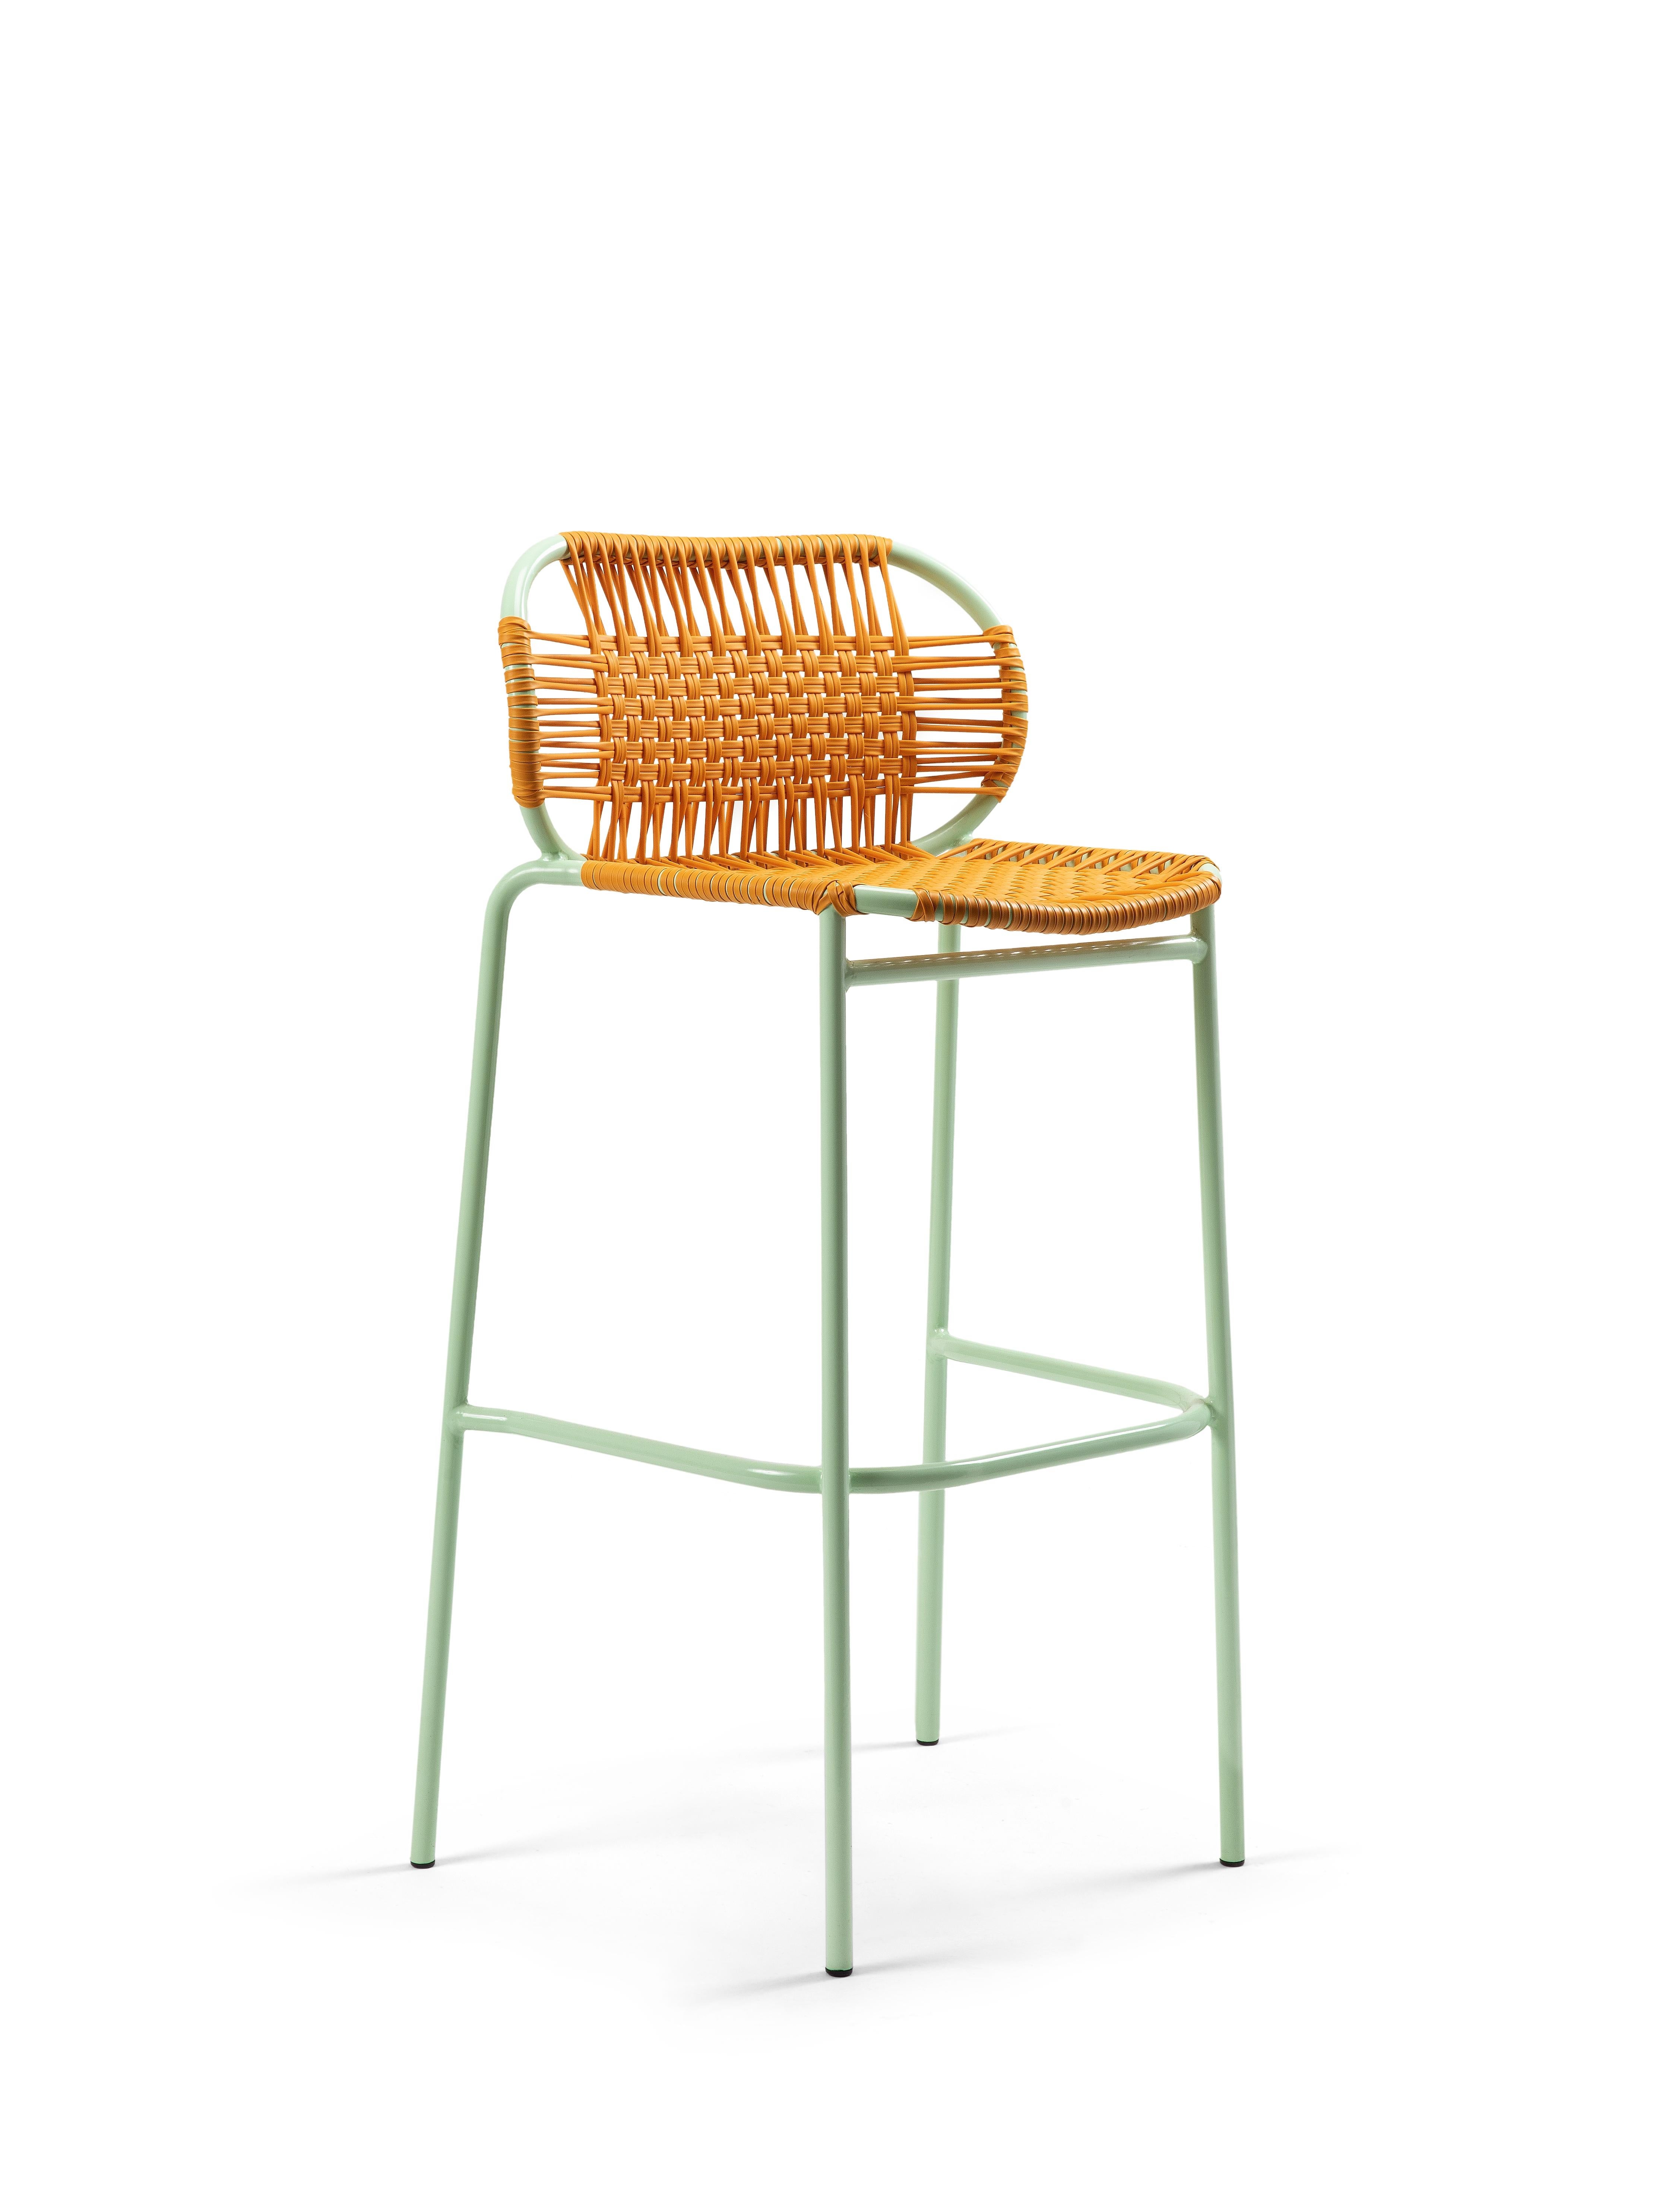 Set of 2 honey Cielo bar stool by Sebastian Herkner.
Materials: galvanized and powder-coated tubular steel. PVC strings are made from recycled plastic.
Technique: made from recycled plastic and weaved by local craftspeople in Cartagena, Colombia.